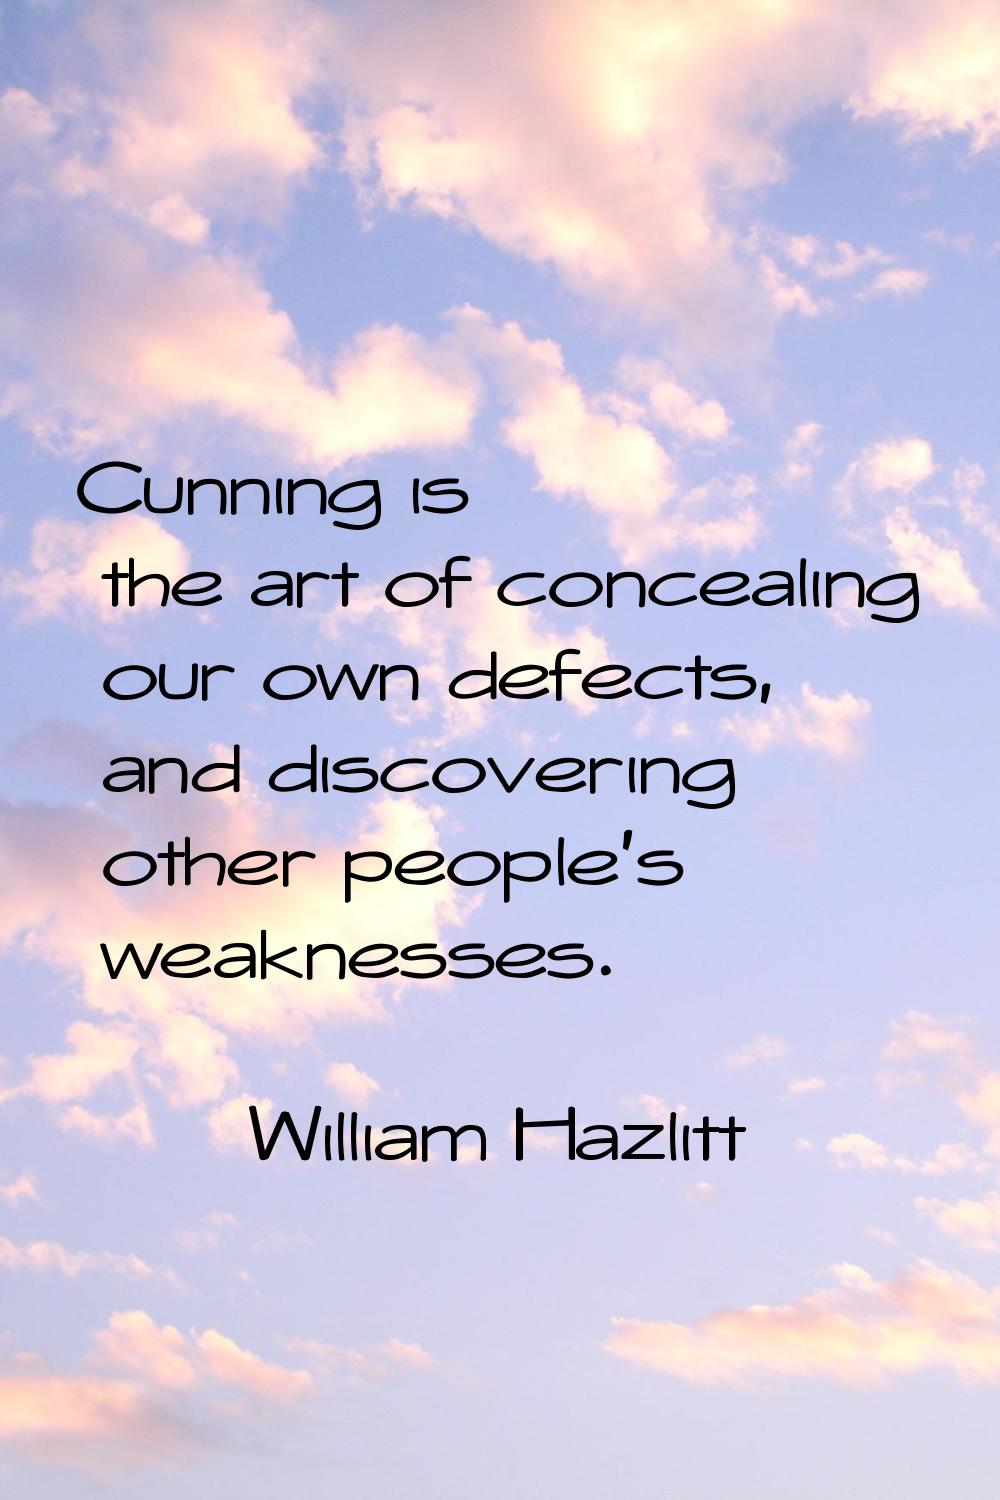 Cunning is the art of concealing our own defects, and discovering other people's weaknesses.